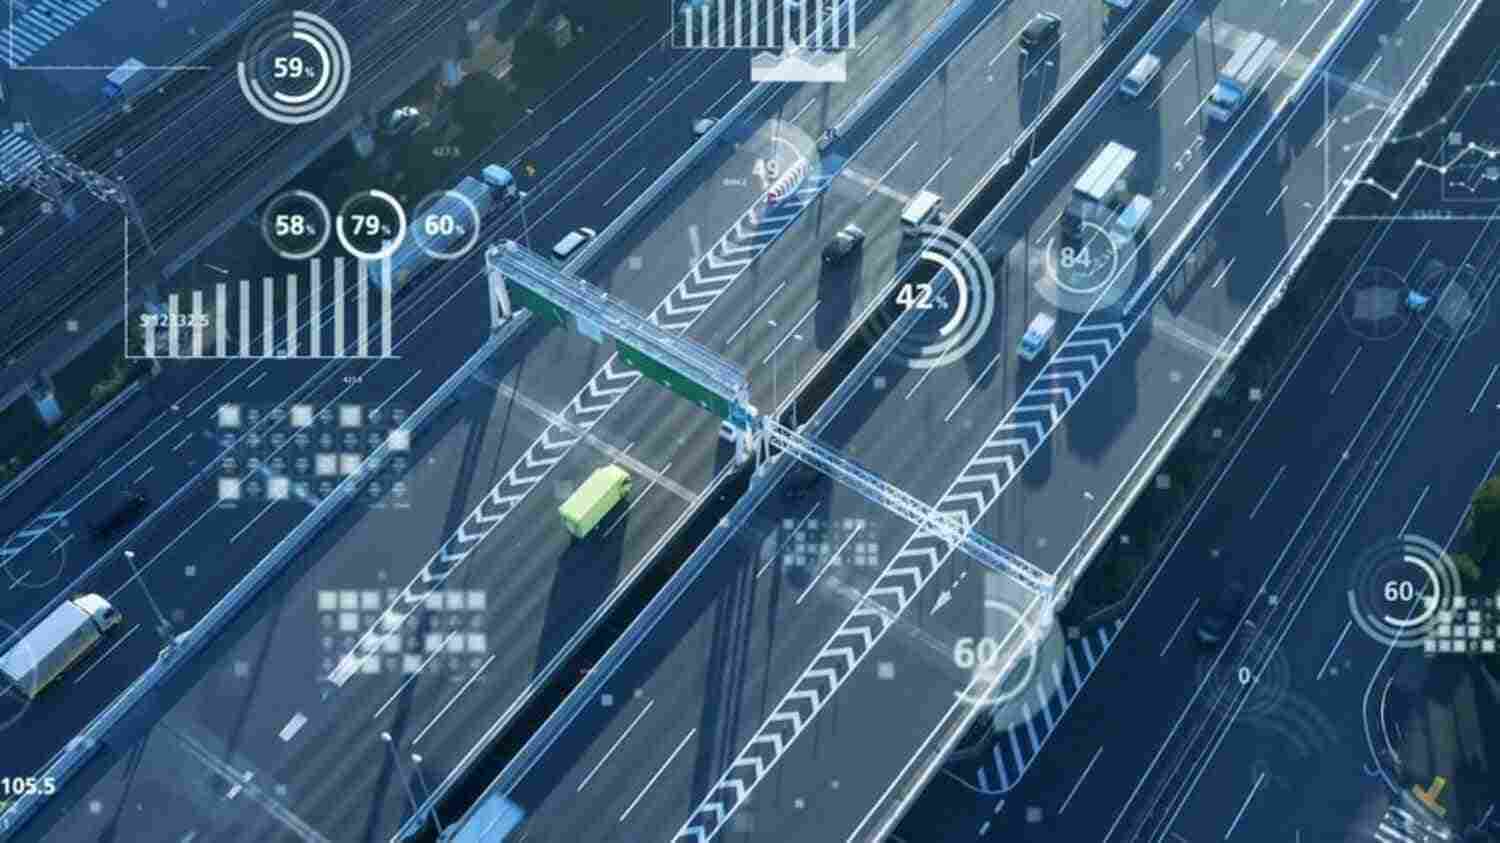 The Future Is Software - Part 5 of the ‘Intelligent Automotive Series’